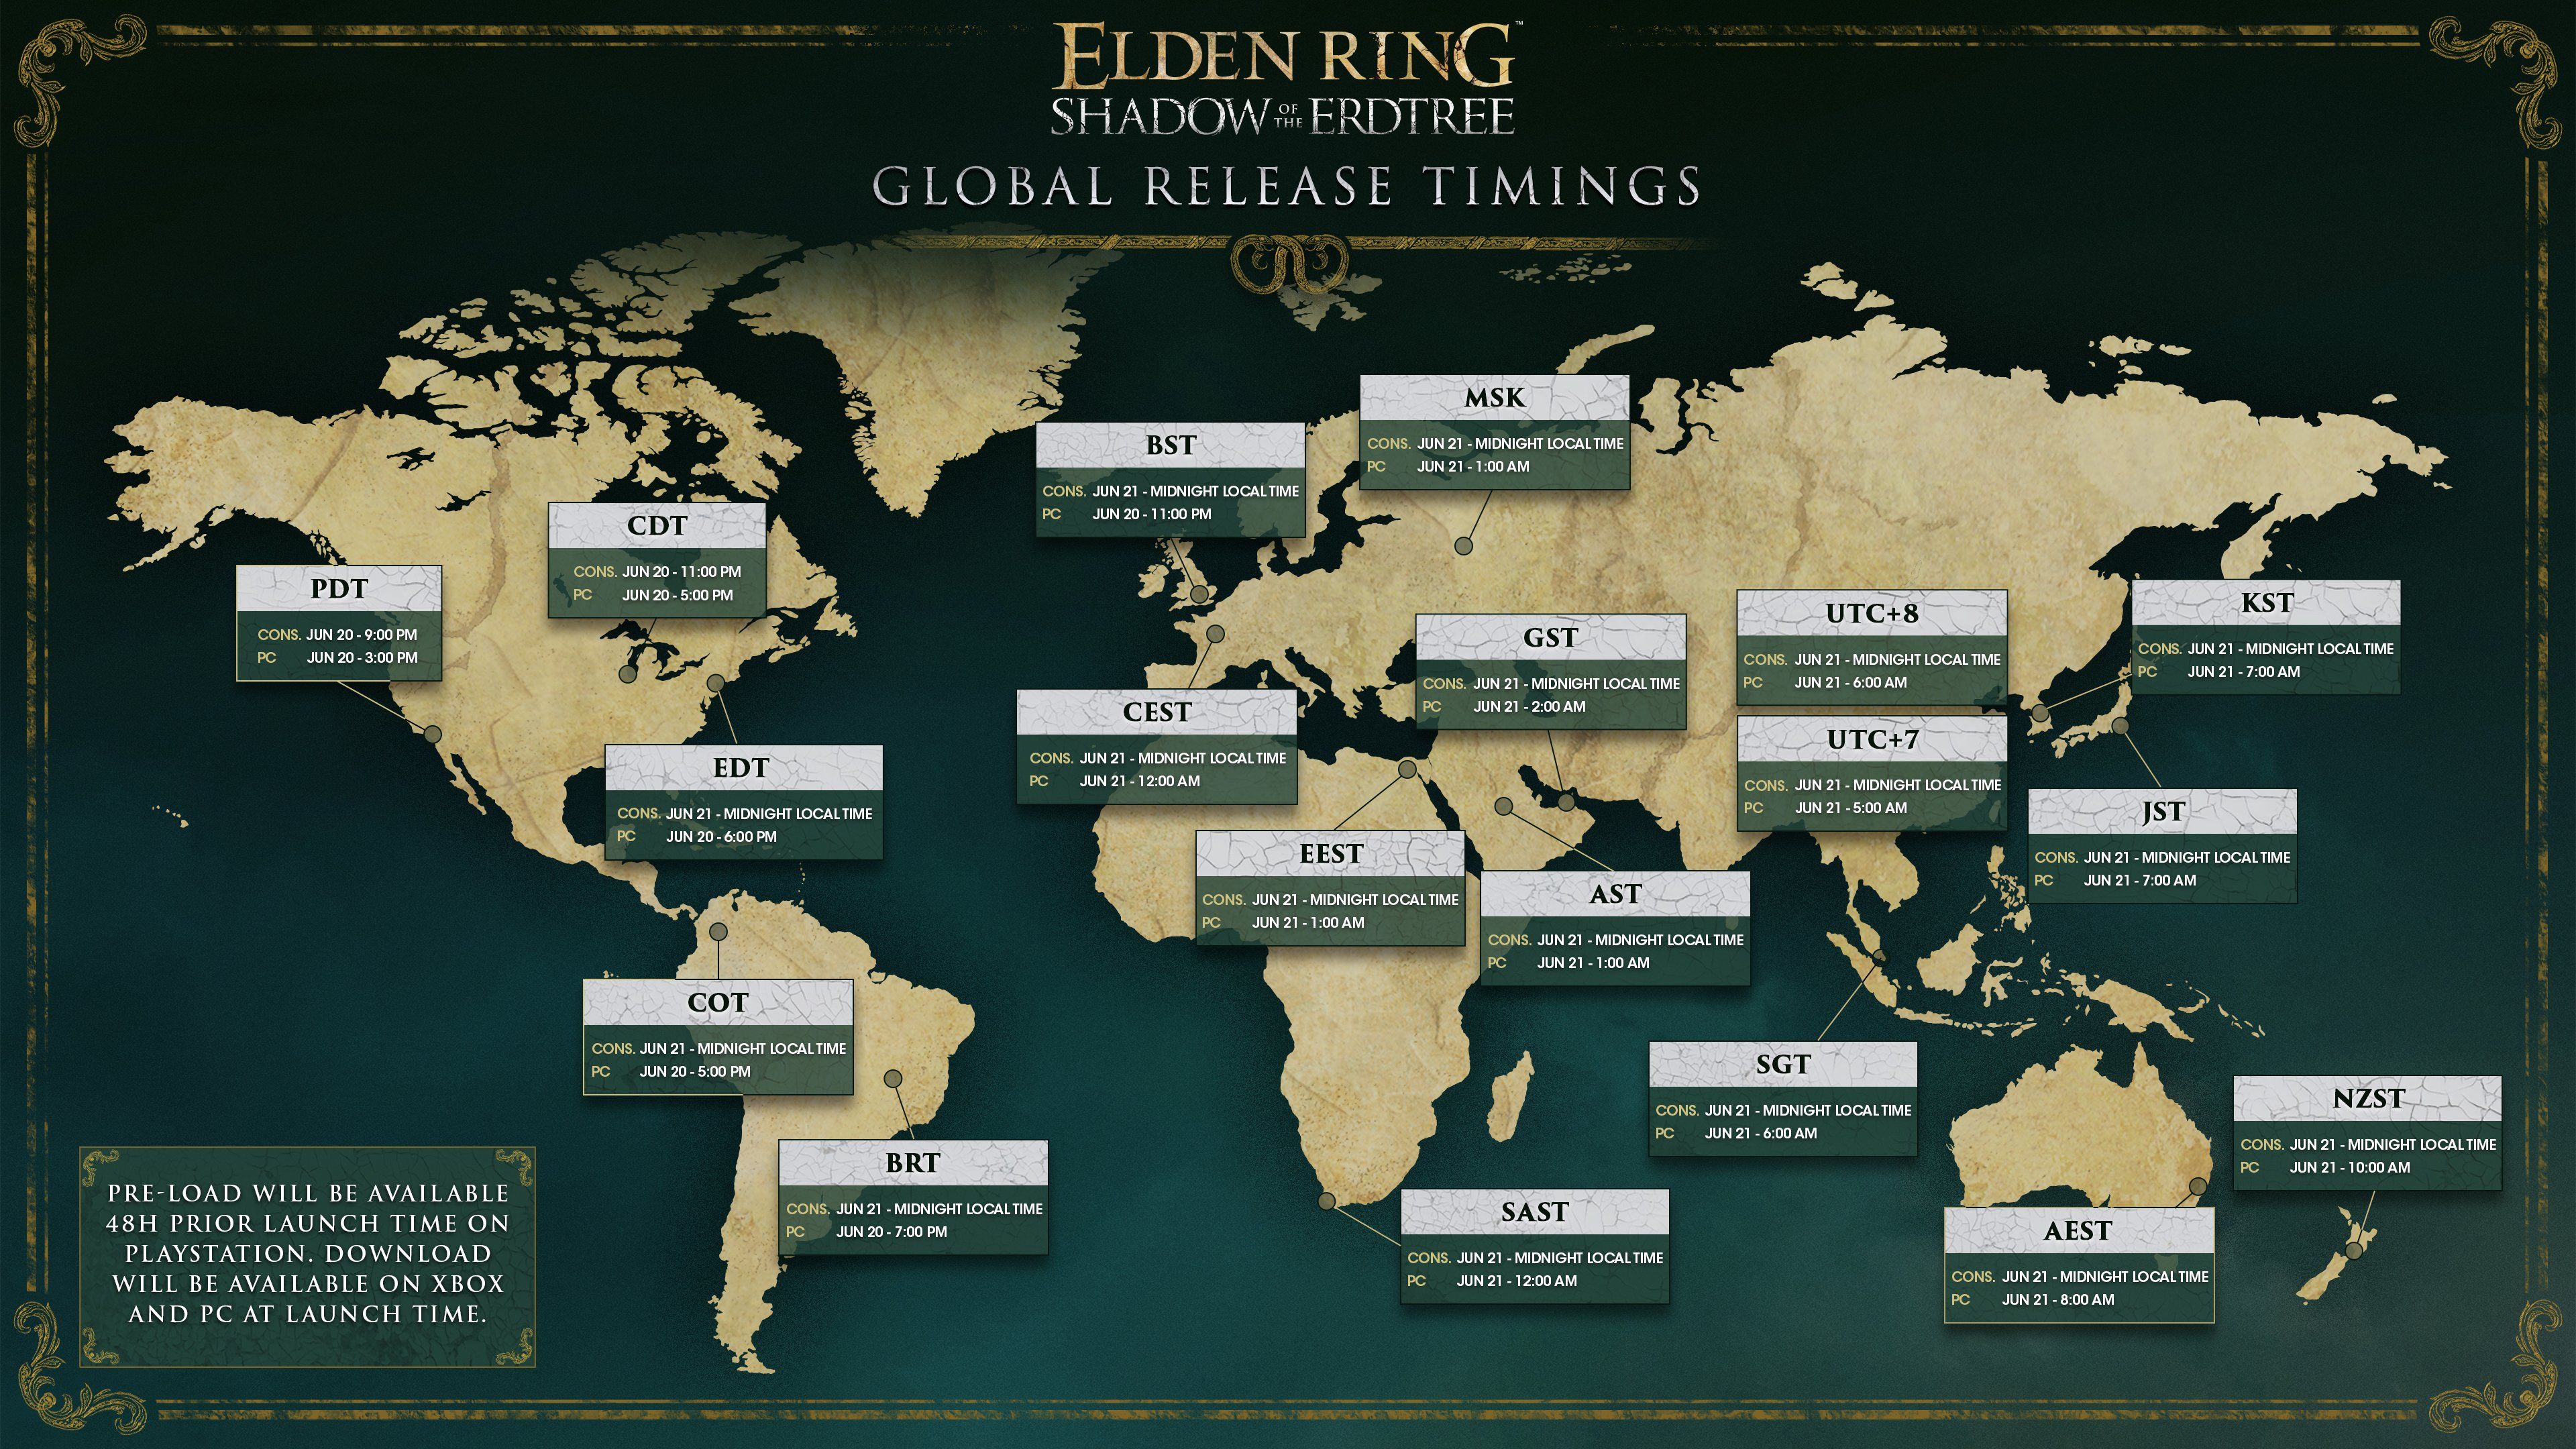 Elden Ring Shadow of the Erdtree Global Launch Release Times